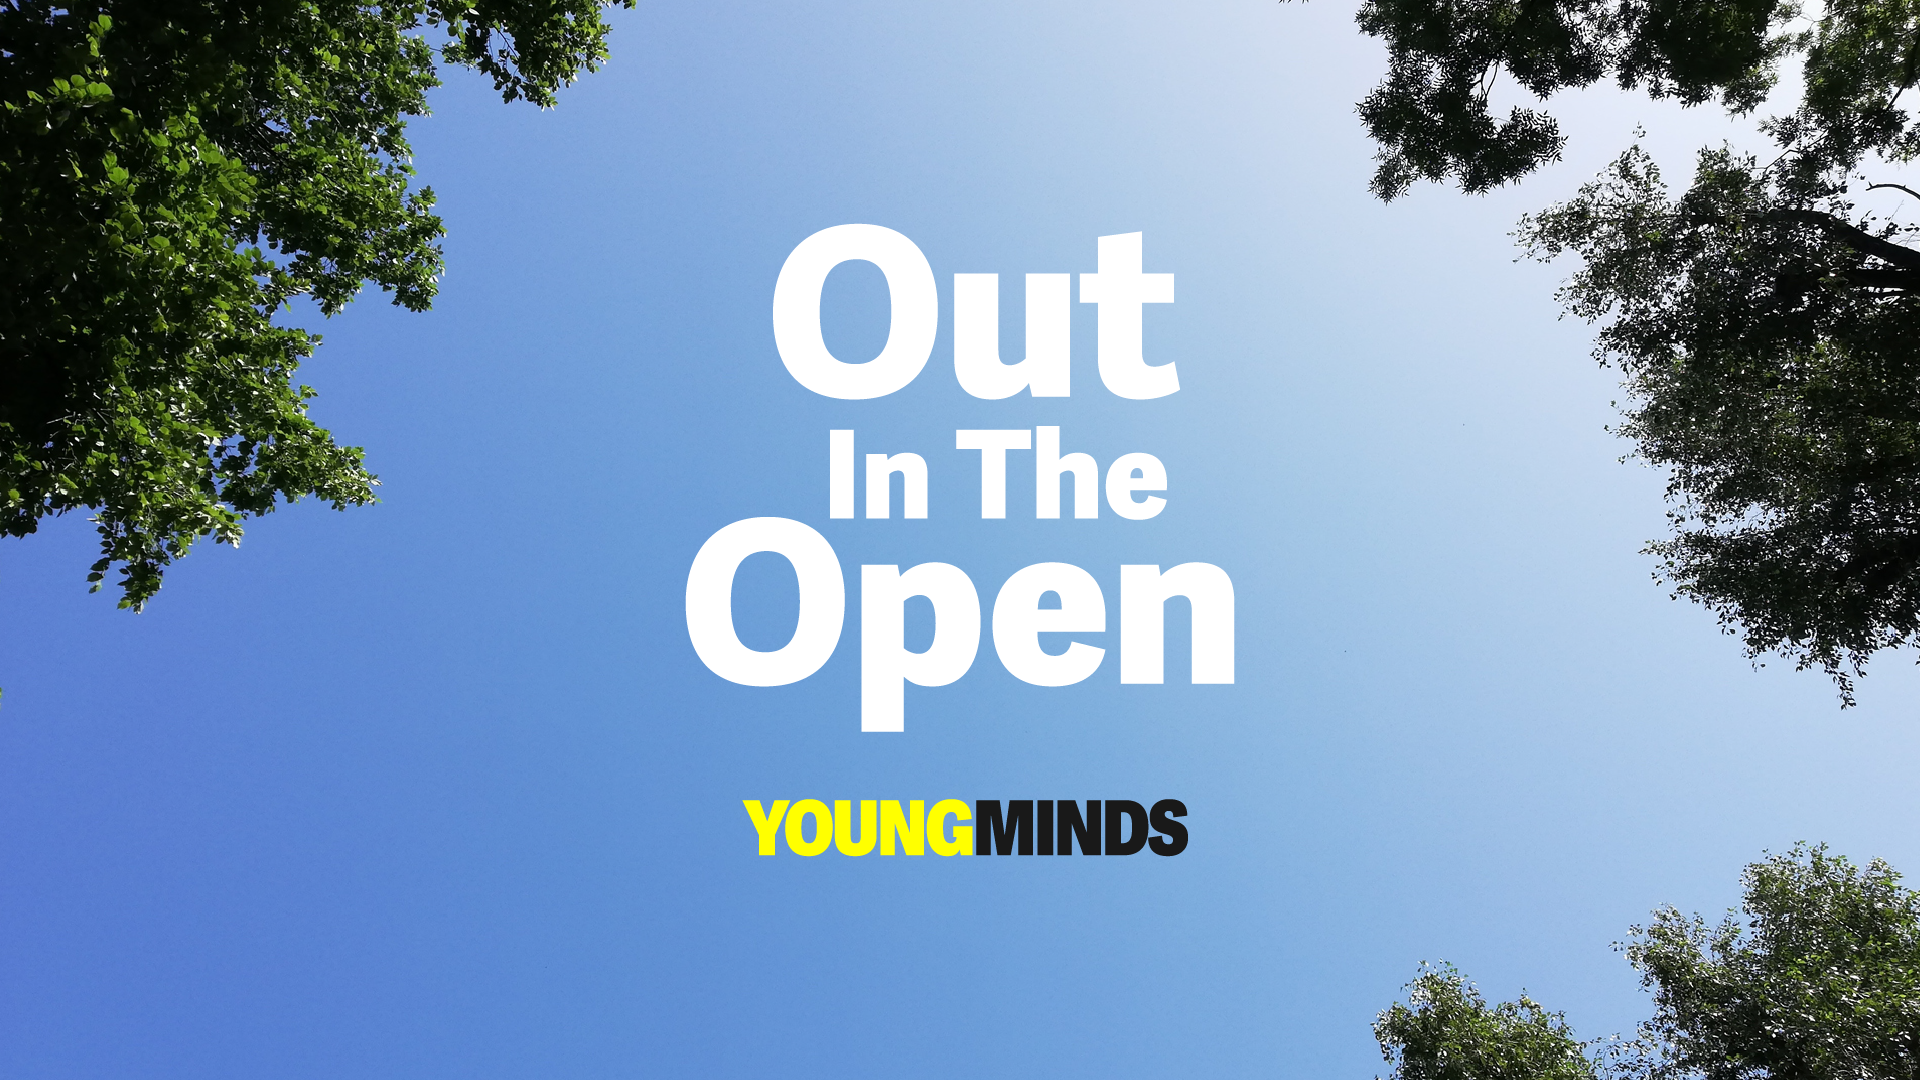 Blue sky and treetops with text reading 'Out In The Open YoungMinds'